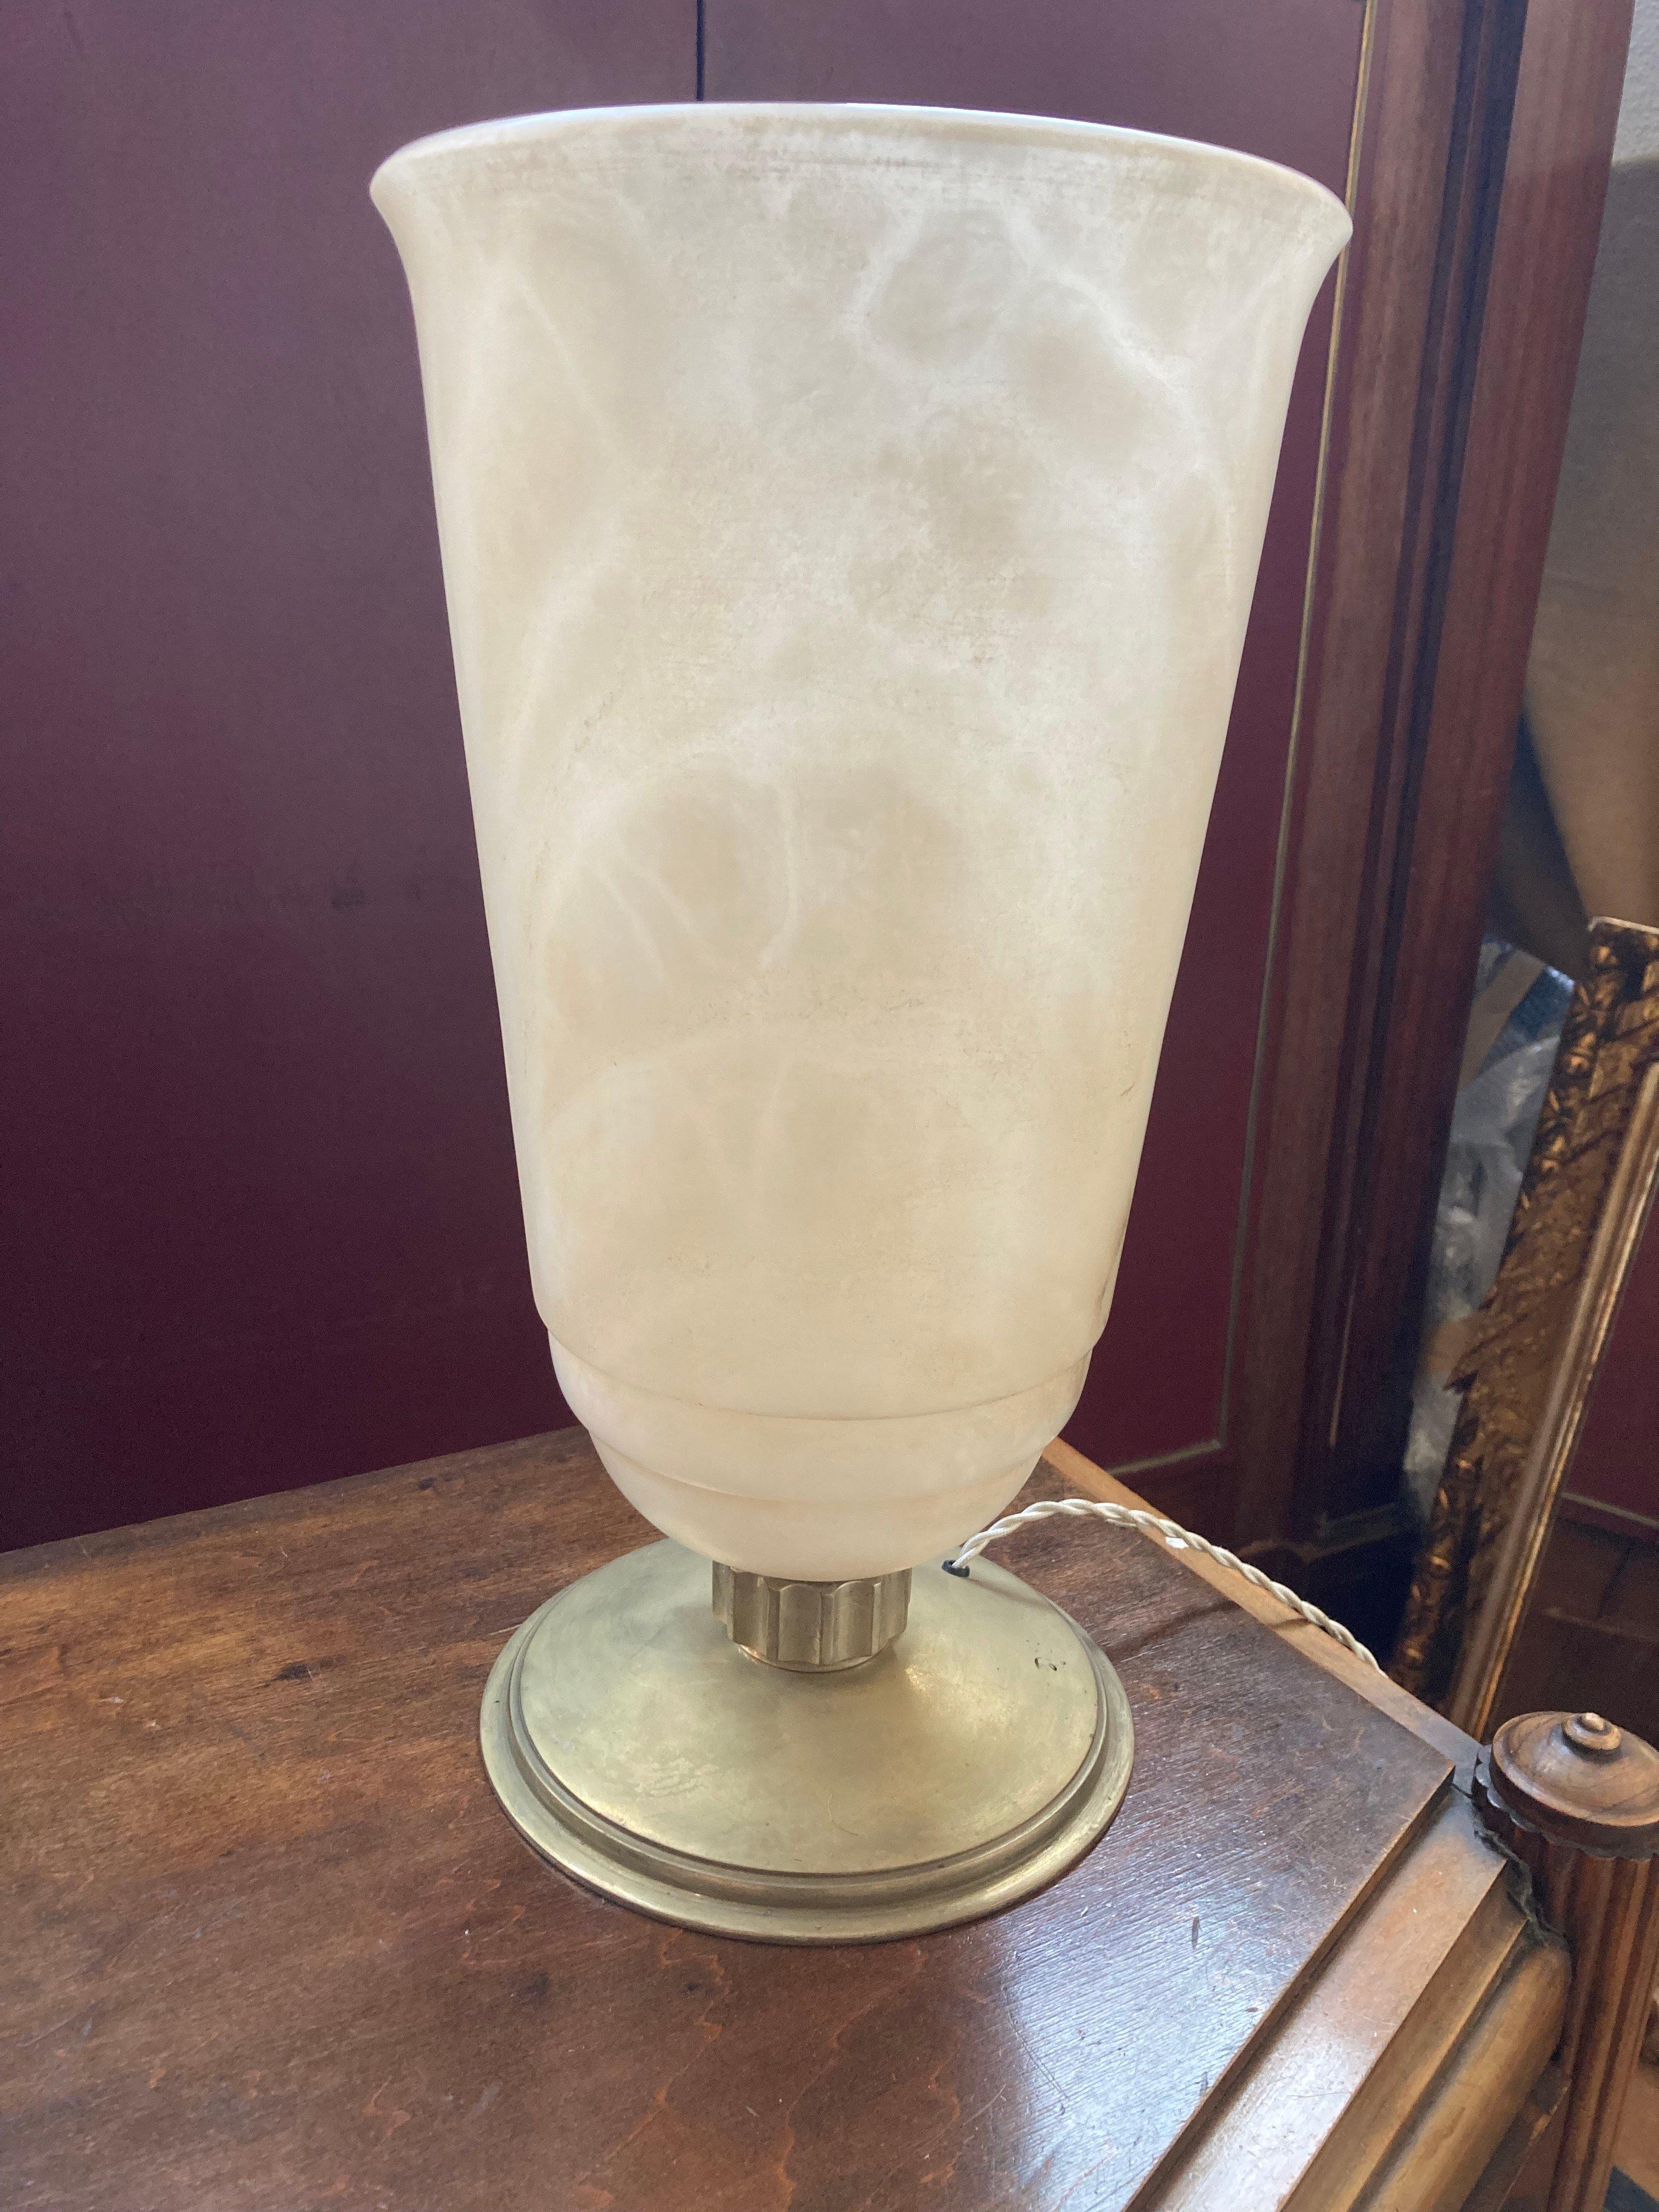 French Alabaster table lamp . Nickel plated. Art Déco style.
These Alabaster lamps were originally designed by E.Jacques Ruhlmann in the 1920s and were part of luxury liners and luxury hotels.
Beautifully grained thick-walled Alabaster.
Nickel